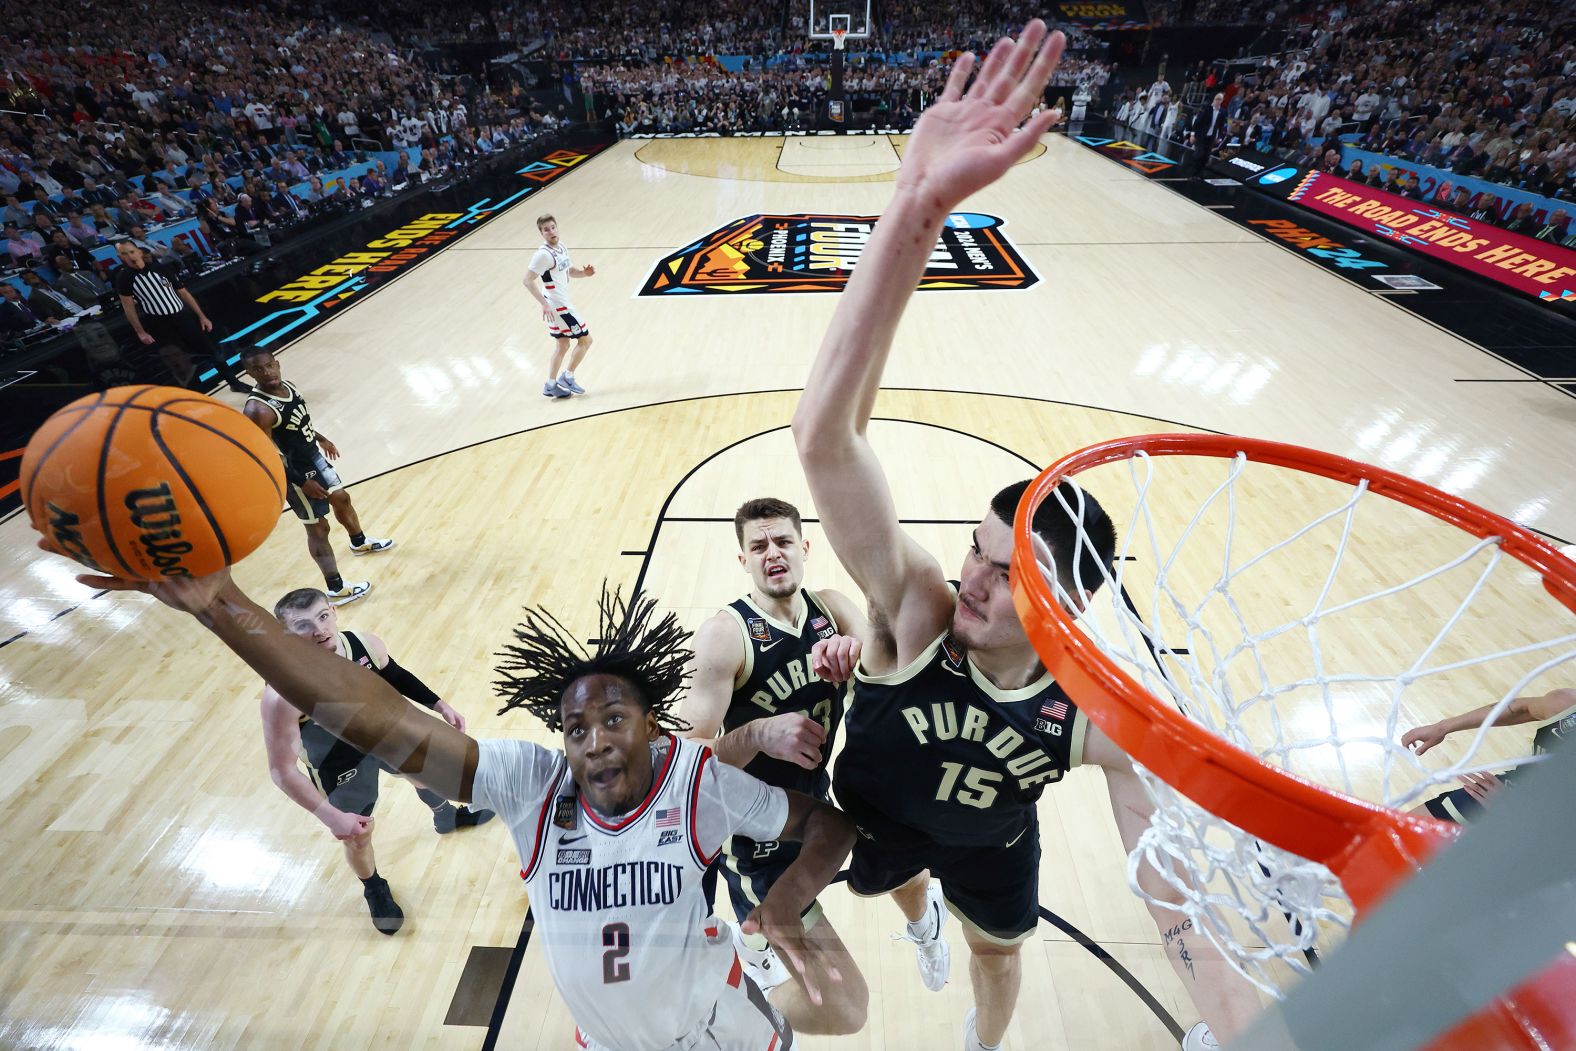 UConn guard Tristen Newton attempts a layup over Purdue's Zach Edey during the NCAA <a href="index.php?page=&url=https%3A%2F%2Fwww.cnn.com%2F2024%2F04%2F07%2Fsport%2Fgallery%2Fncaa-mens-final-four-2024%2Findex.html" target="_blank">men's basketball national championship game</a> on Monday, April 8, in Phoenix, Arizona. UConn defeated Purdue 75-60 to win its <a href="index.php?page=&url=https%3A%2F%2Fwww.cnn.com%2F2024%2F04%2F09%2Fsport%2Fuconn-ncaa-basketball-title-hurley-purdue-spt-intl%2Findex.html" target="_blank">second consecutive title</a>, becoming the first back-to-back champion since Florida in 2006 and 2007.